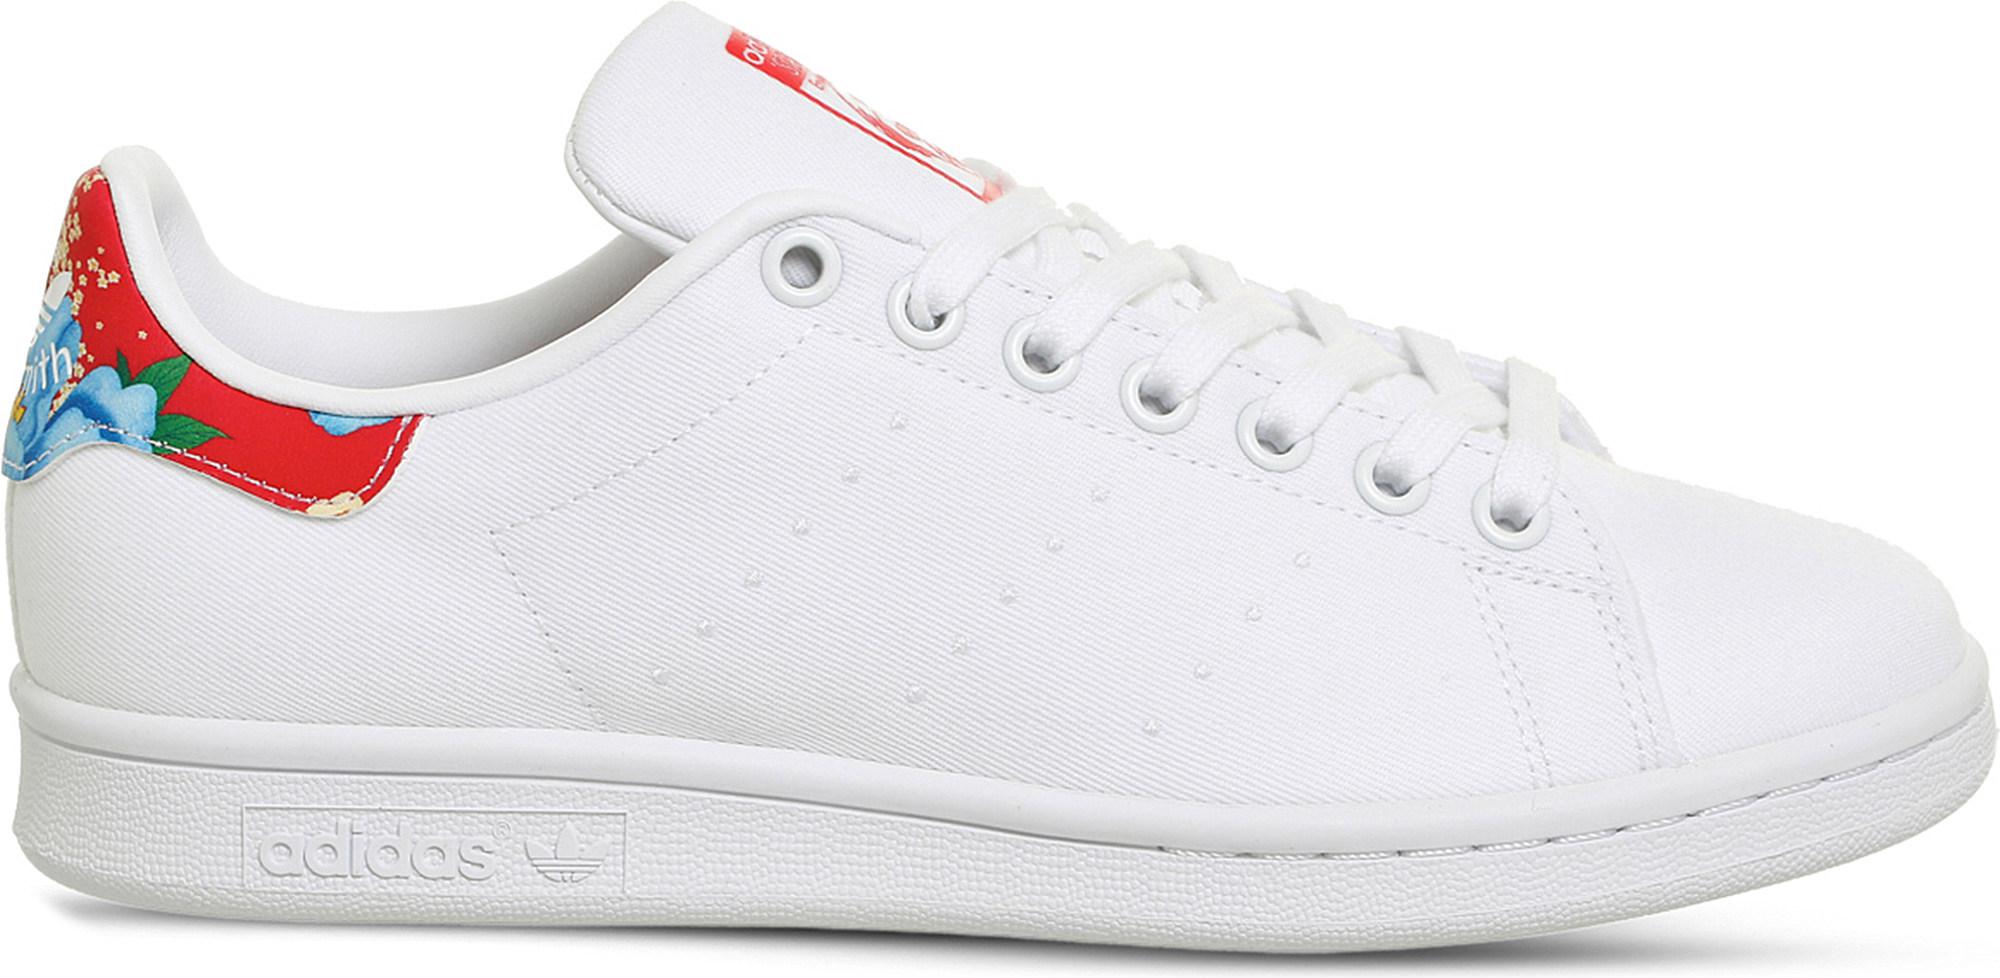 adidas Originals Stan Smith Floral Canvas Trainers in White